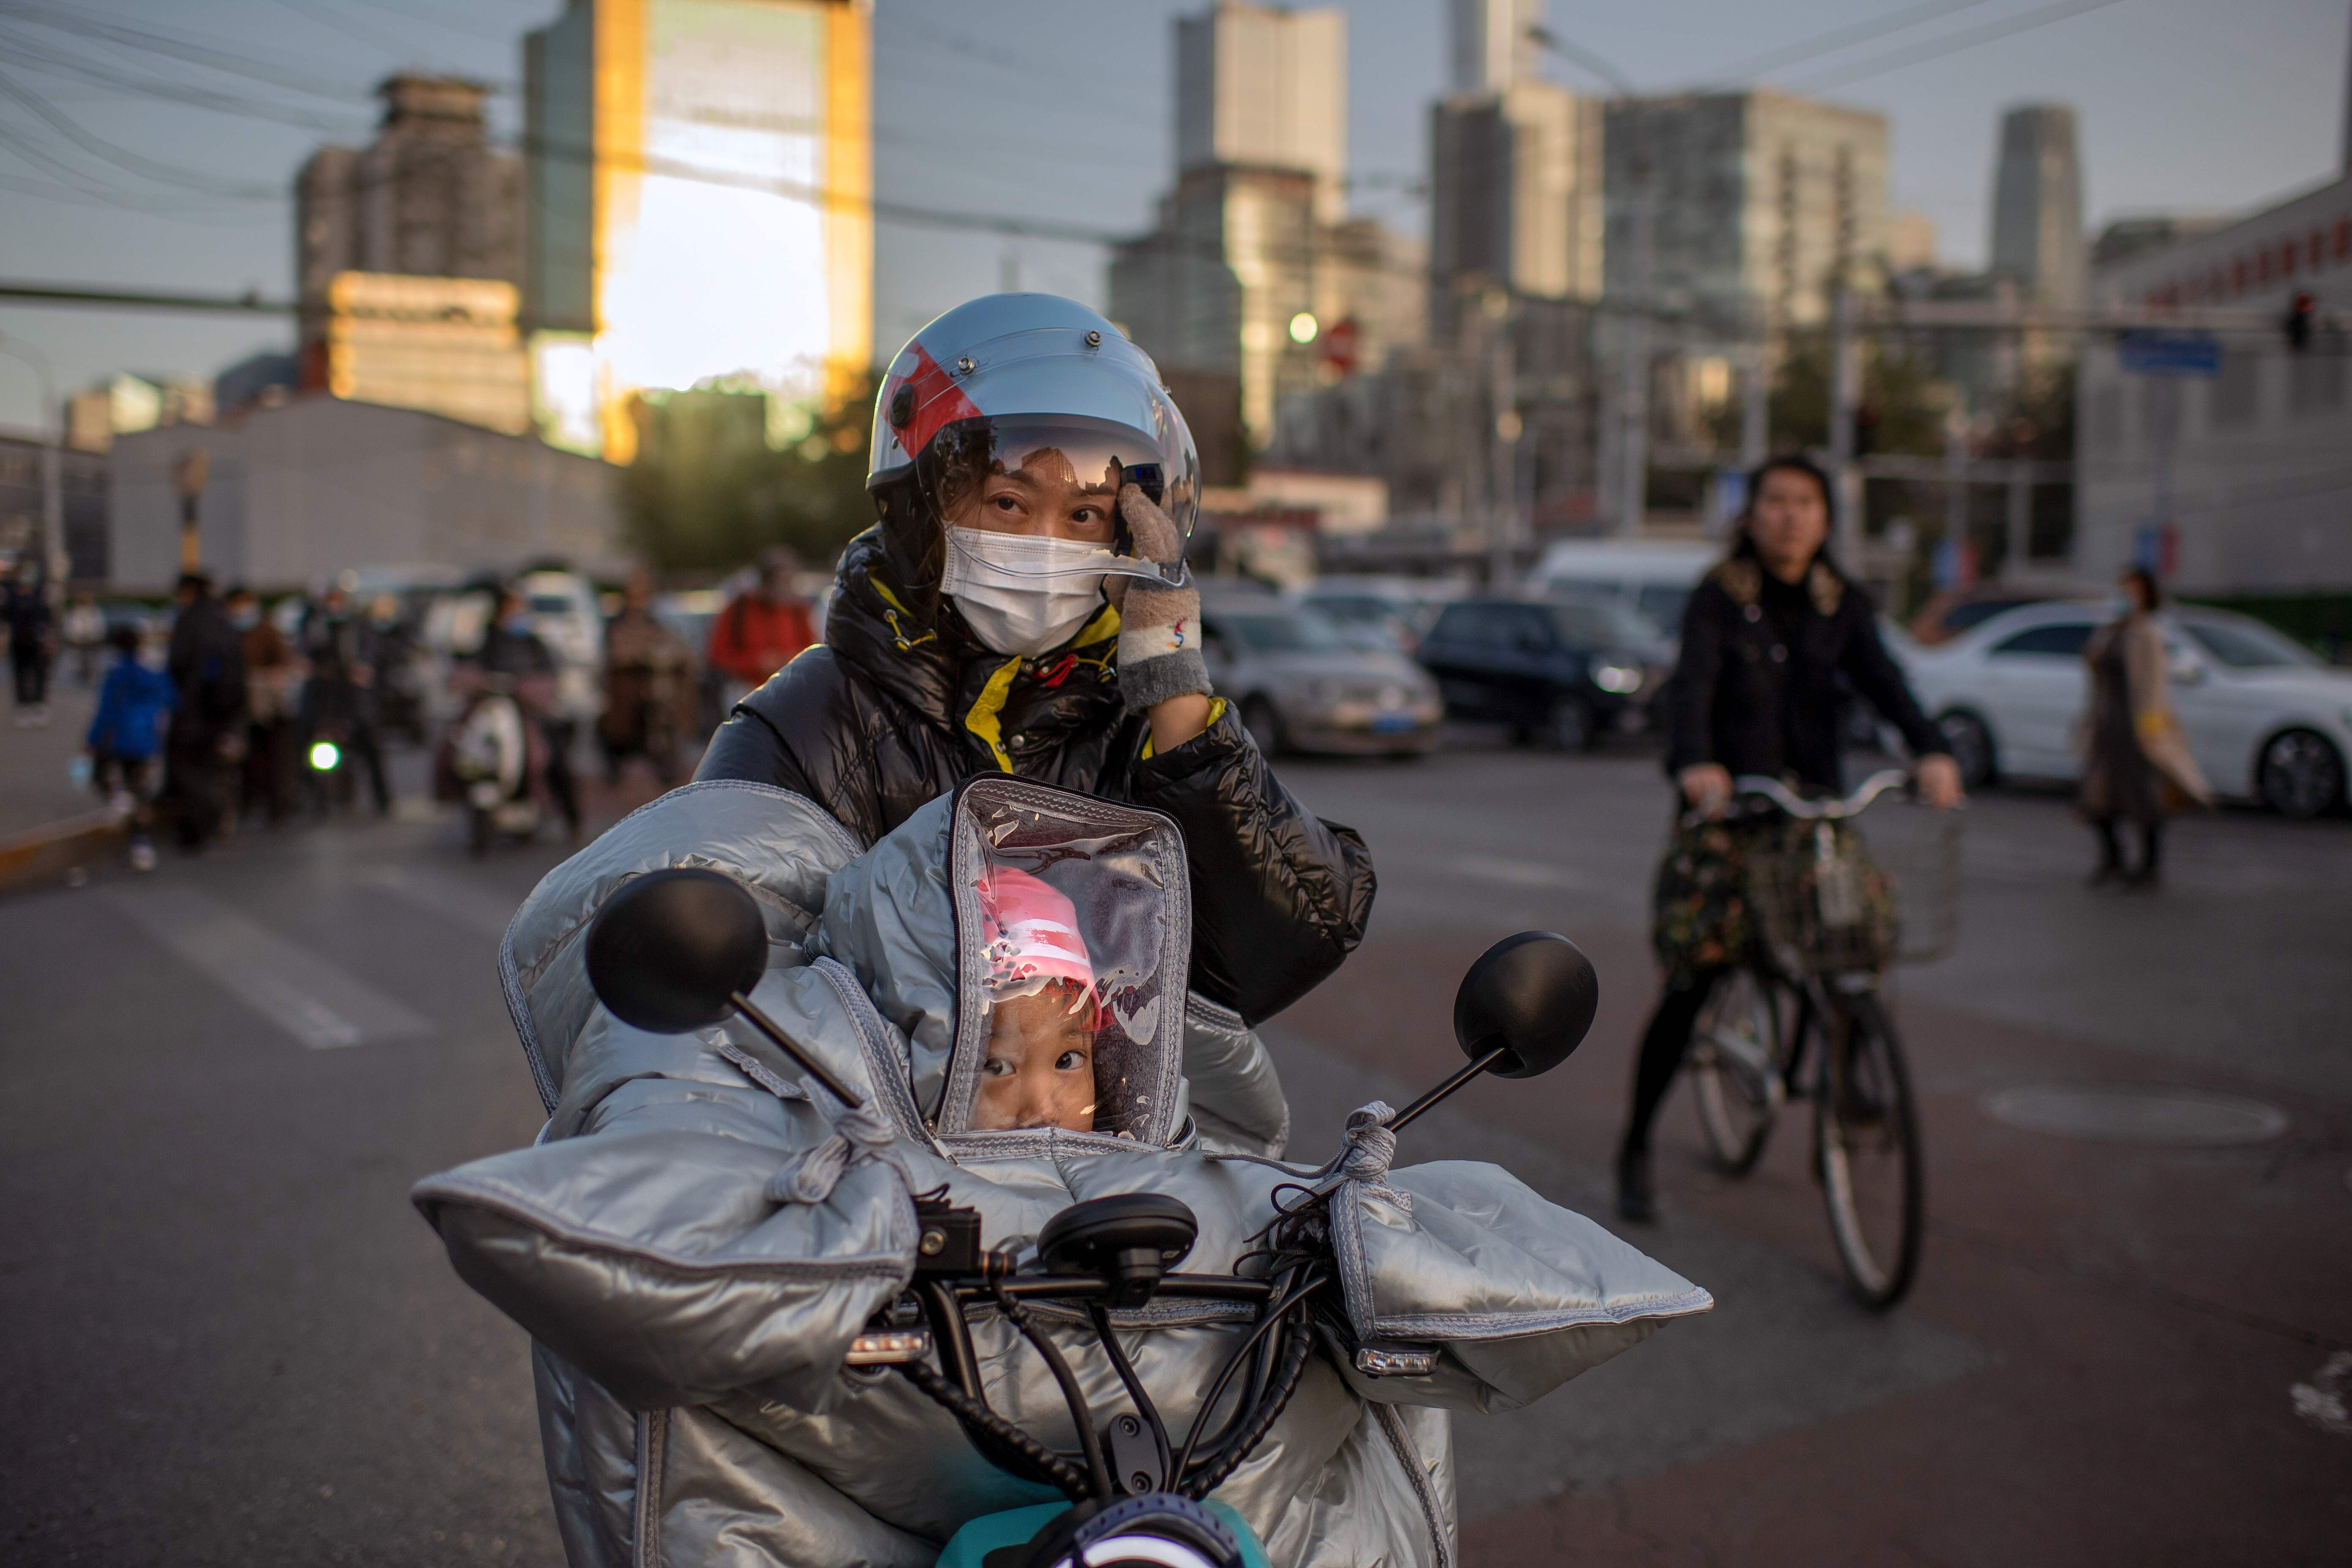 A woman and a child in protective gear ride an electric bike during rush hour in Beijing. China’s recovery from the pandemic has not eliminated the uncertainties surrounding its growth outlook. Photo: AFP